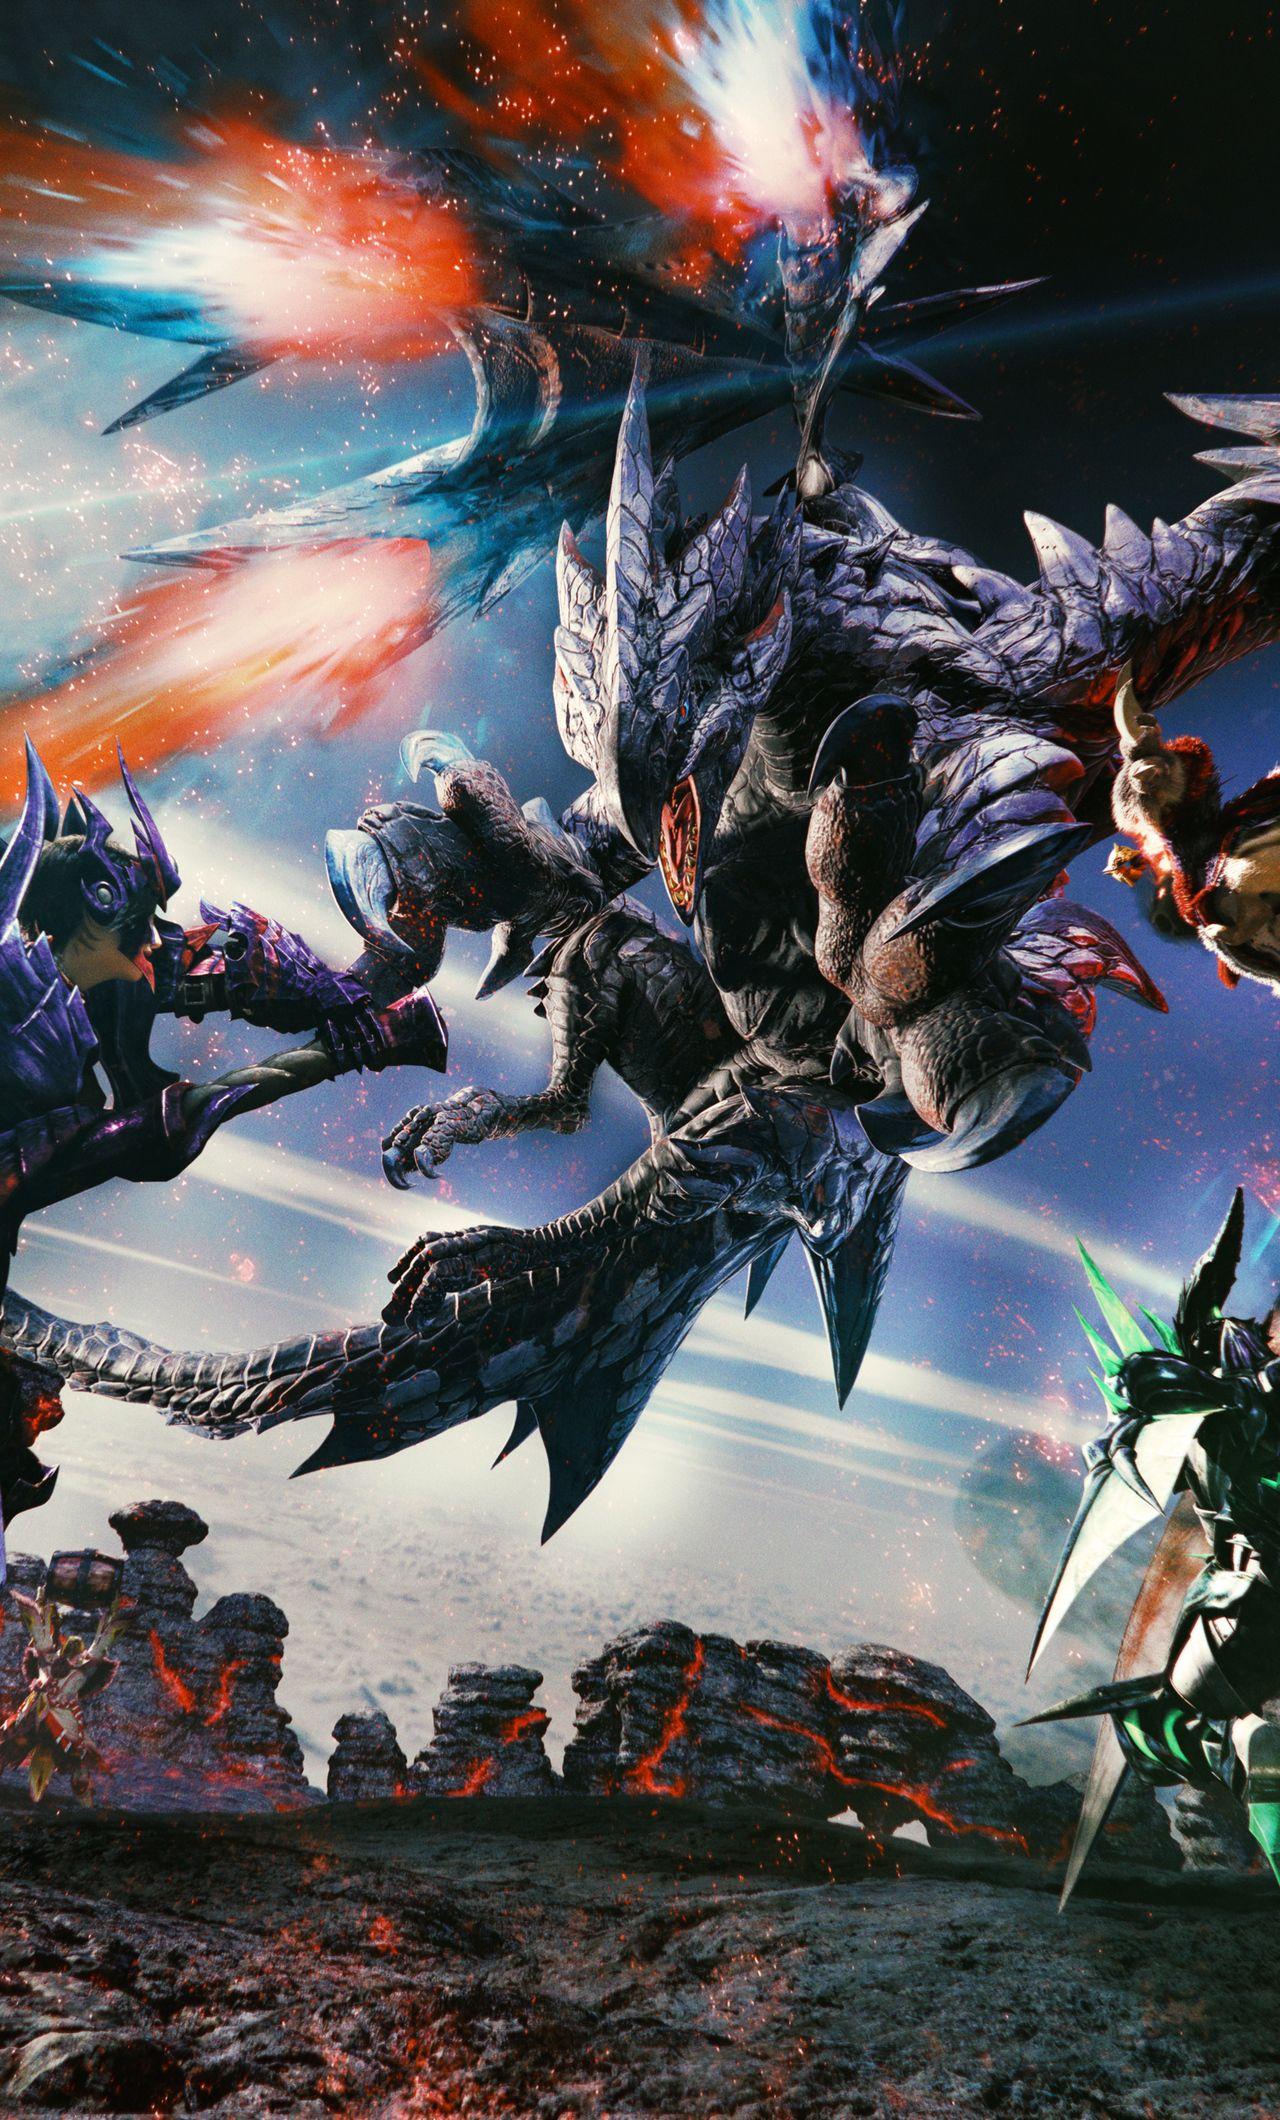 Monster Hunter Iphone Wallpapers Top Free Monster Hunter Iphone Backgrounds Wallpaperaccess